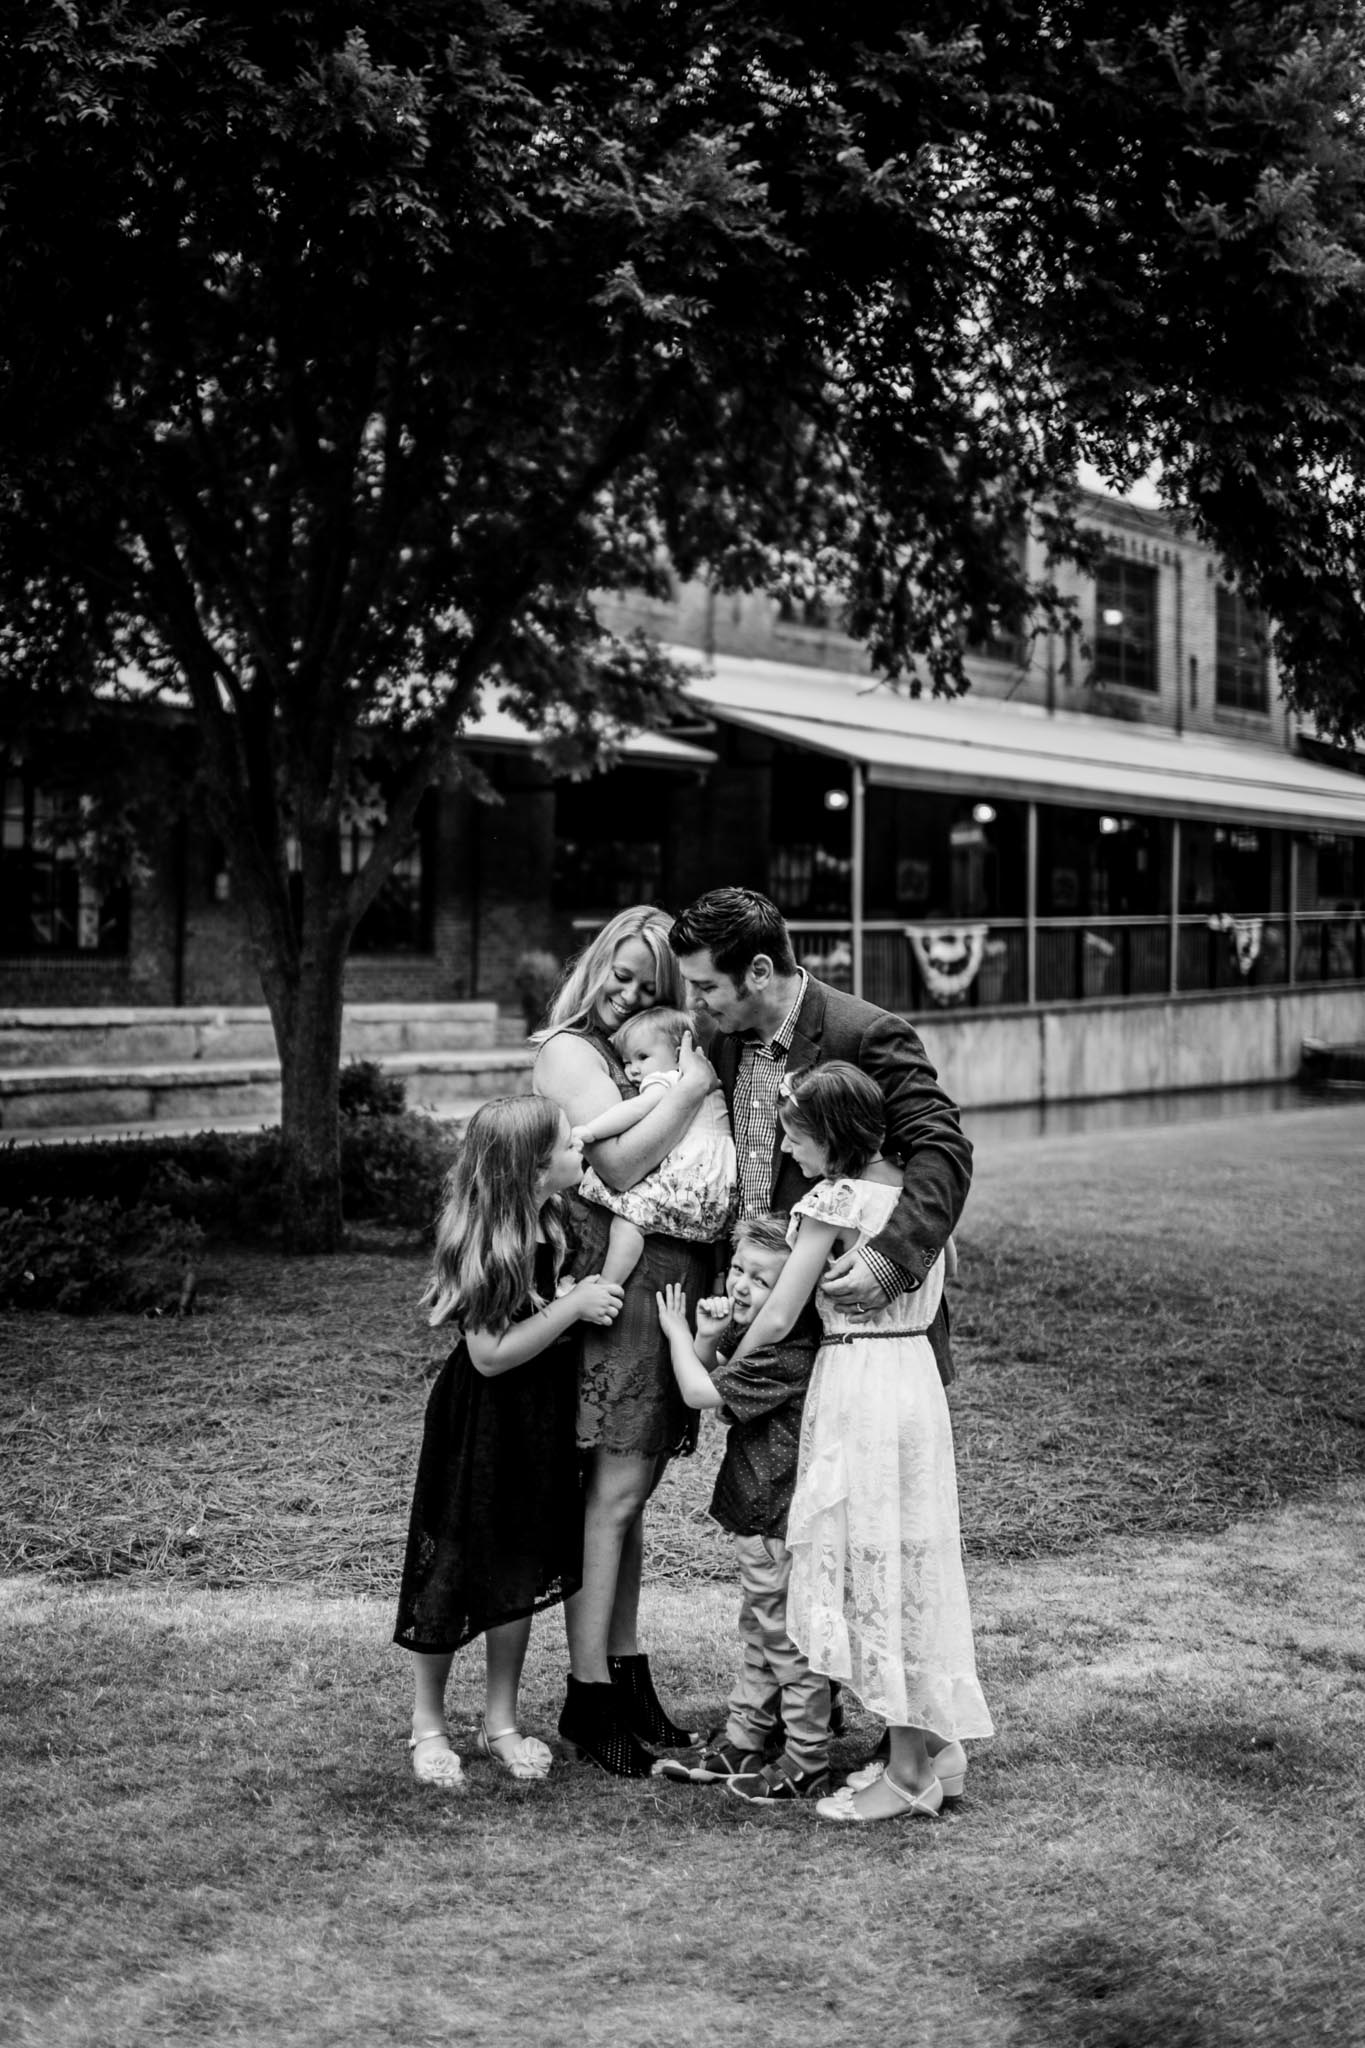 Durham Family Photographer | By G. Lin Photography | Candid black and white portrait of family hugging together